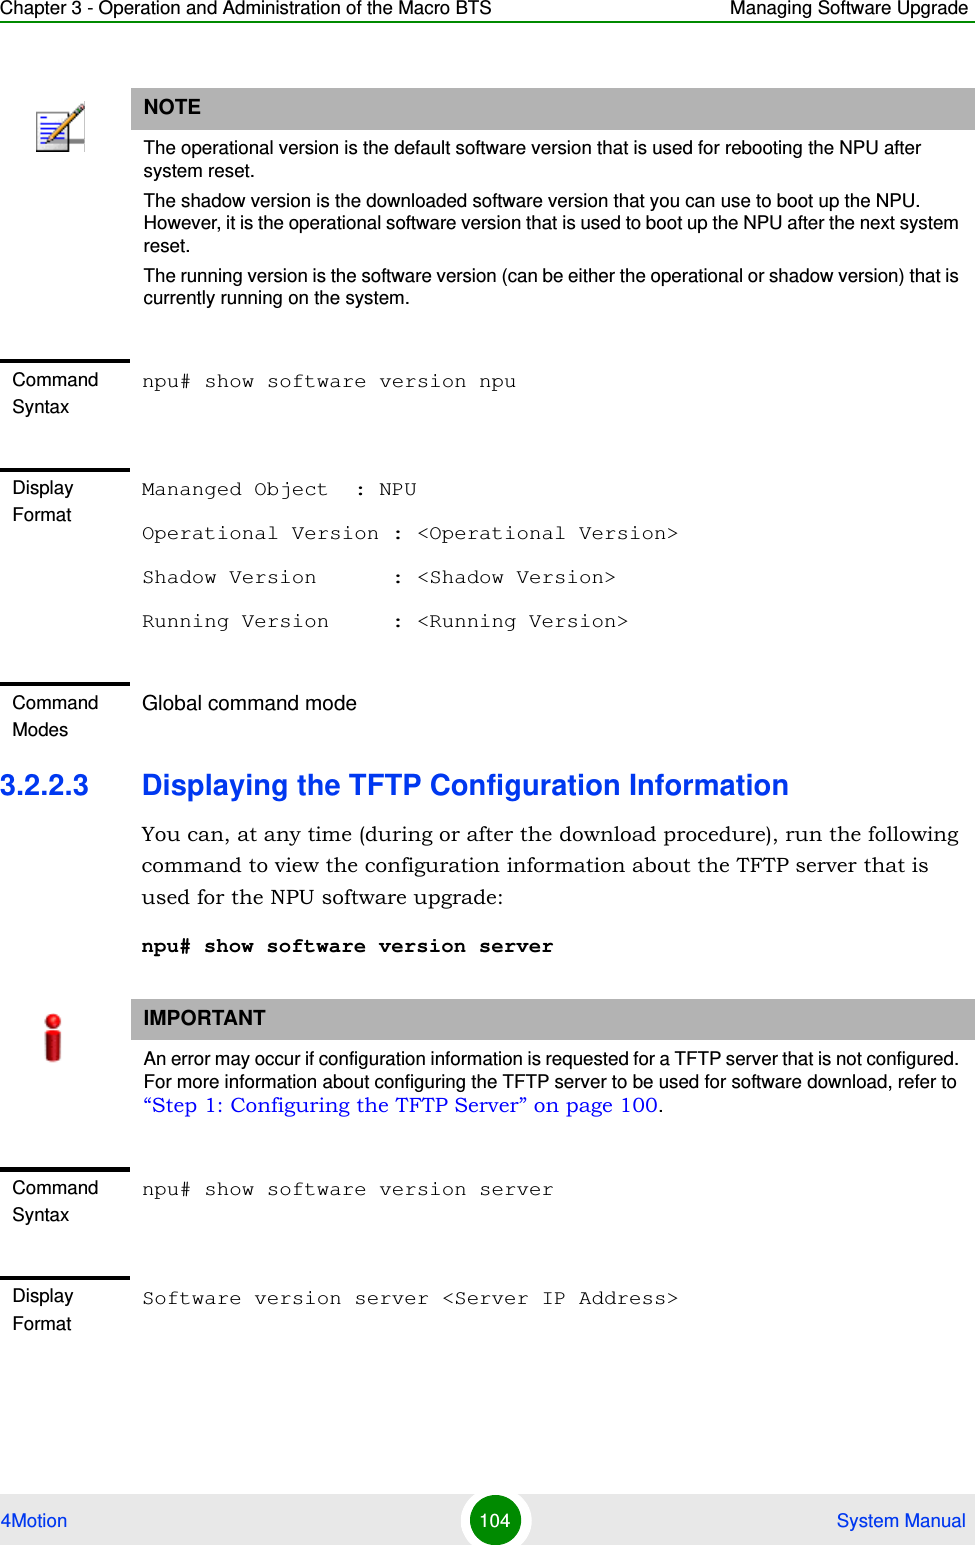 Chapter 3 - Operation and Administration of the Macro BTS Managing Software Upgrade4Motion 104  System Manual3.2.2.3 Displaying the TFTP Configuration InformationYou can, at any time (during or after the download procedure), run the following command to view the configuration information about the TFTP server that is used for the NPU software upgrade:npu# show software version serverNOTEThe operational version is the default software version that is used for rebooting the NPU after system reset. The shadow version is the downloaded software version that you can use to boot up the NPU. However, it is the operational software version that is used to boot up the NPU after the next system reset.The running version is the software version (can be either the operational or shadow version) that is currently running on the system.Command Syntaxnpu# show software version npuDisplay FormatMananged Object  : NPUOperational Version : &lt;Operational Version&gt;Shadow Version      : &lt;Shadow Version&gt;Running Version     : &lt;Running Version&gt;Command ModesGlobal command modeIMPORTANTAn error may occur if configuration information is requested for a TFTP server that is not configured. For more information about configuring the TFTP server to be used for software download, refer to “Step 1: Configuring the TFTP Server” on page 100.Command Syntaxnpu# show software version serverDisplay FormatSoftware version server &lt;Server IP Address&gt;